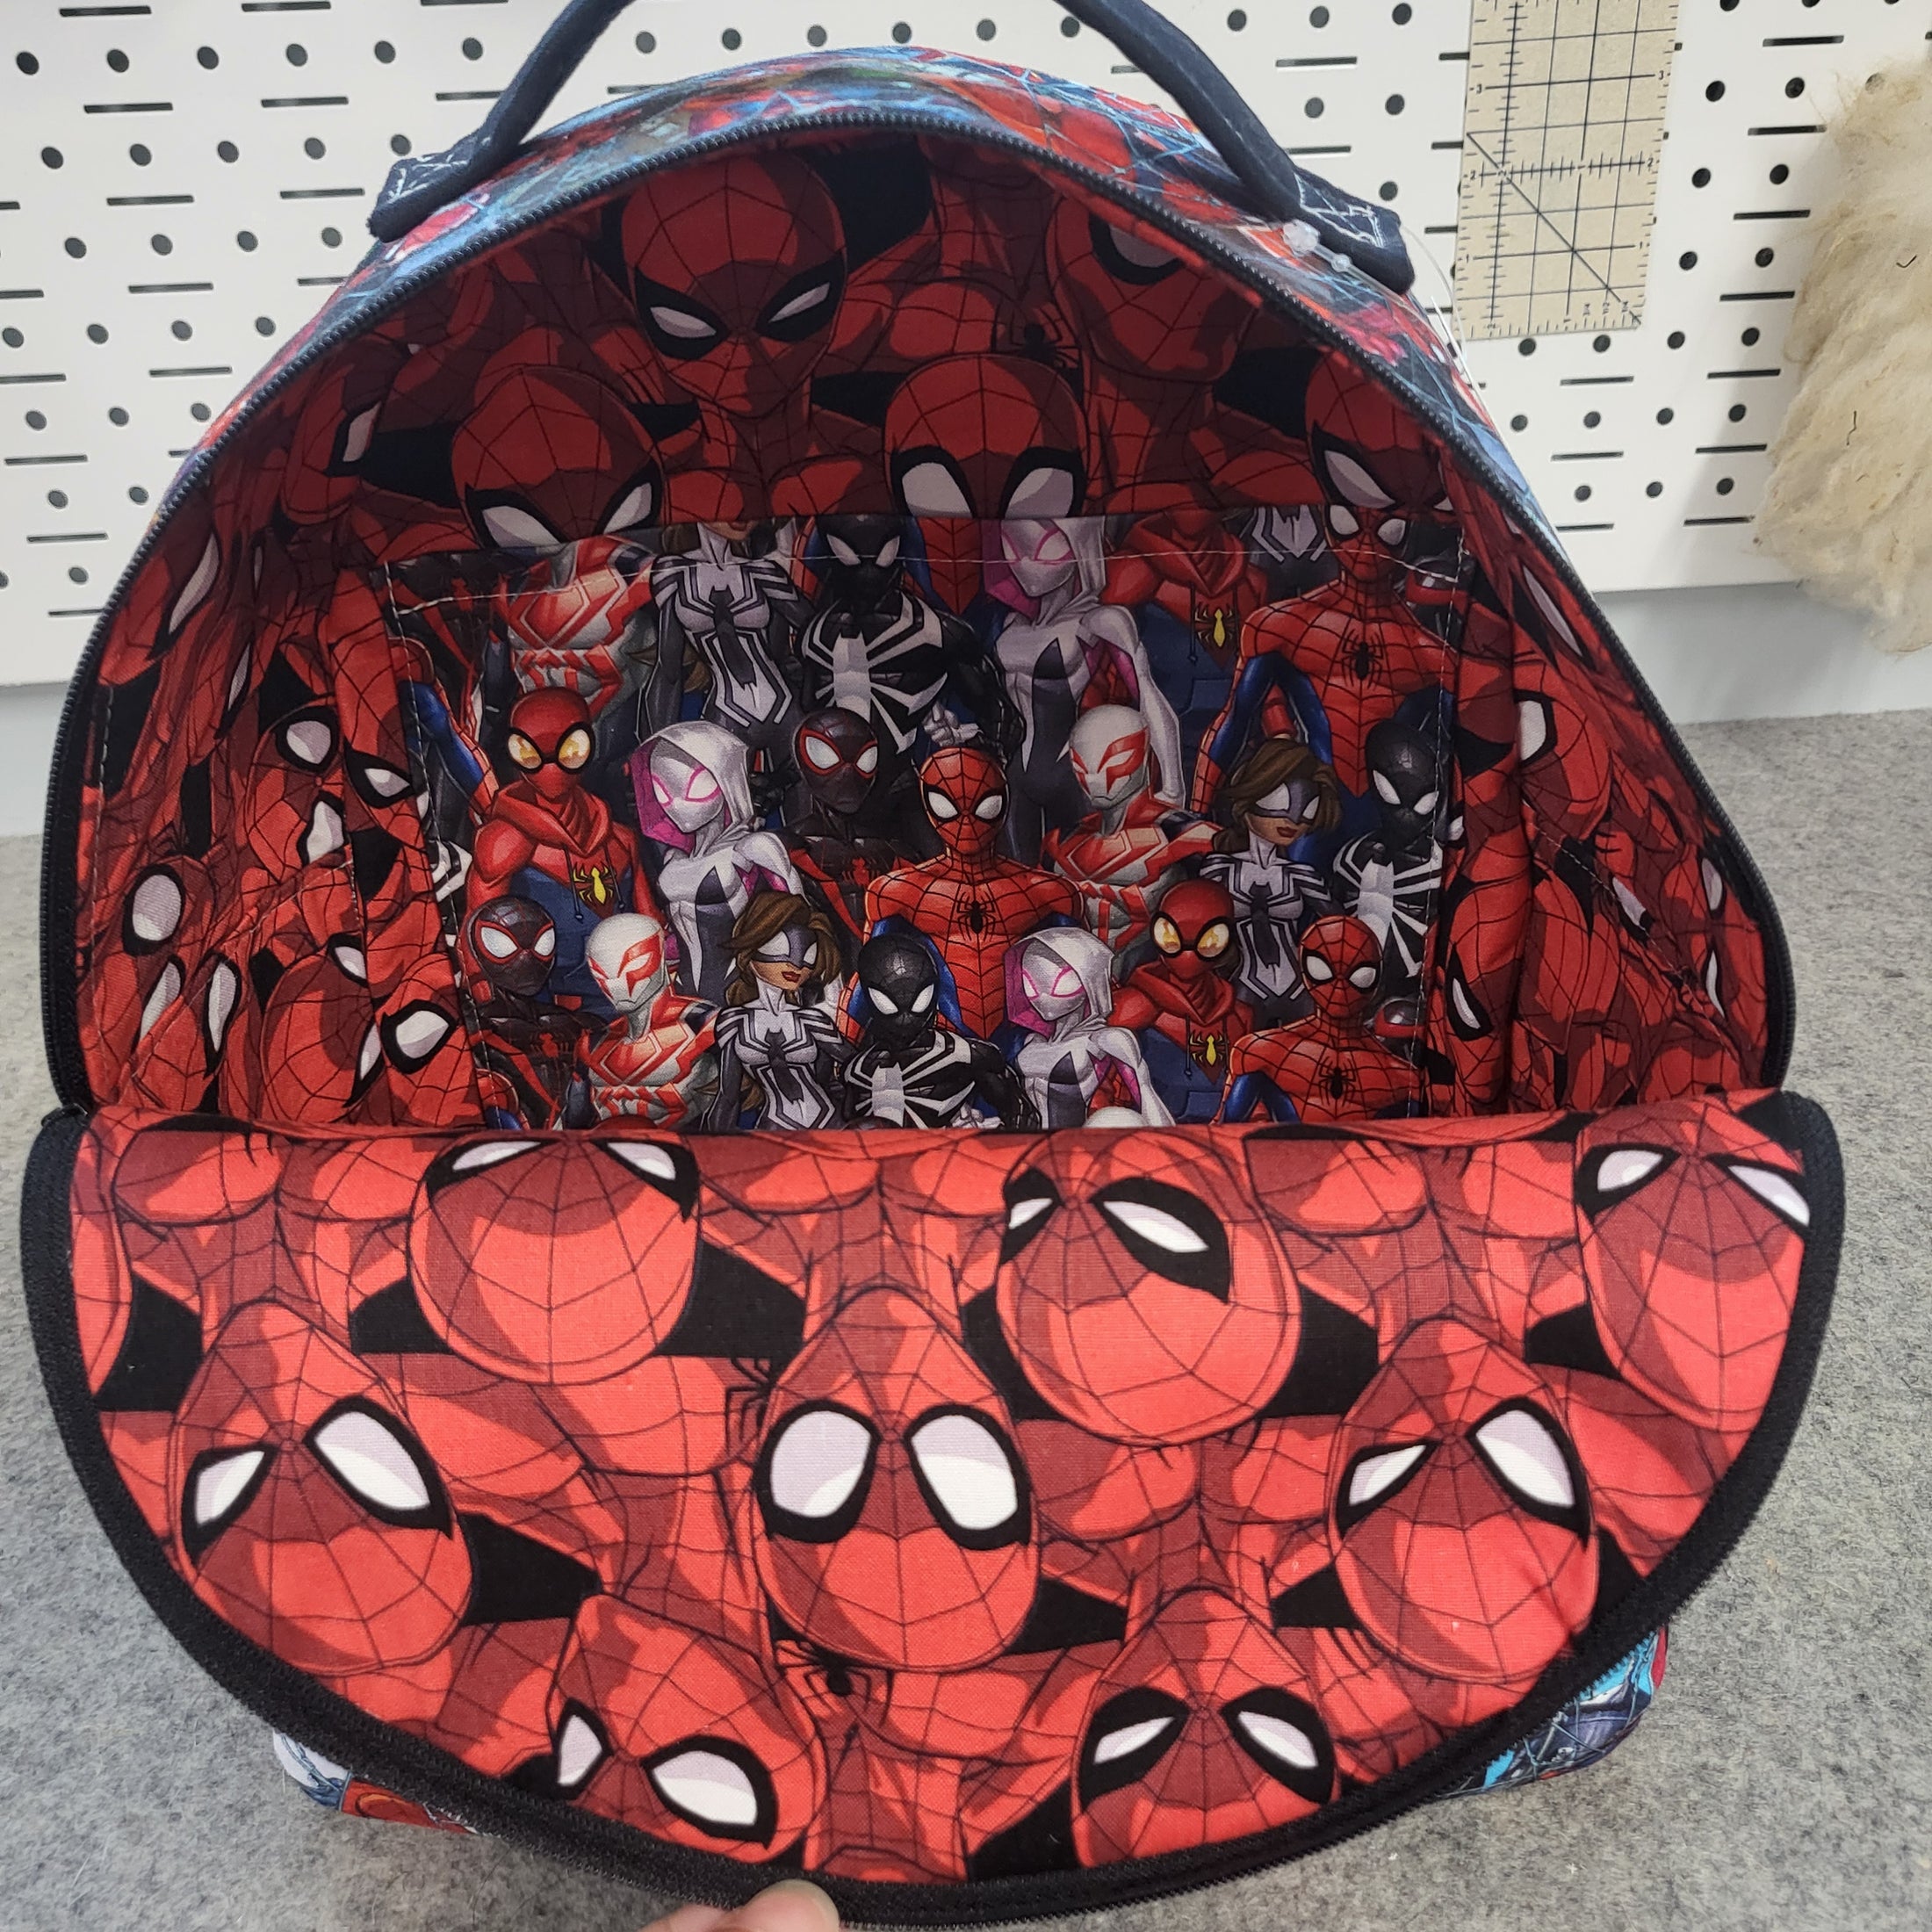 Interior of spiderman backpack.